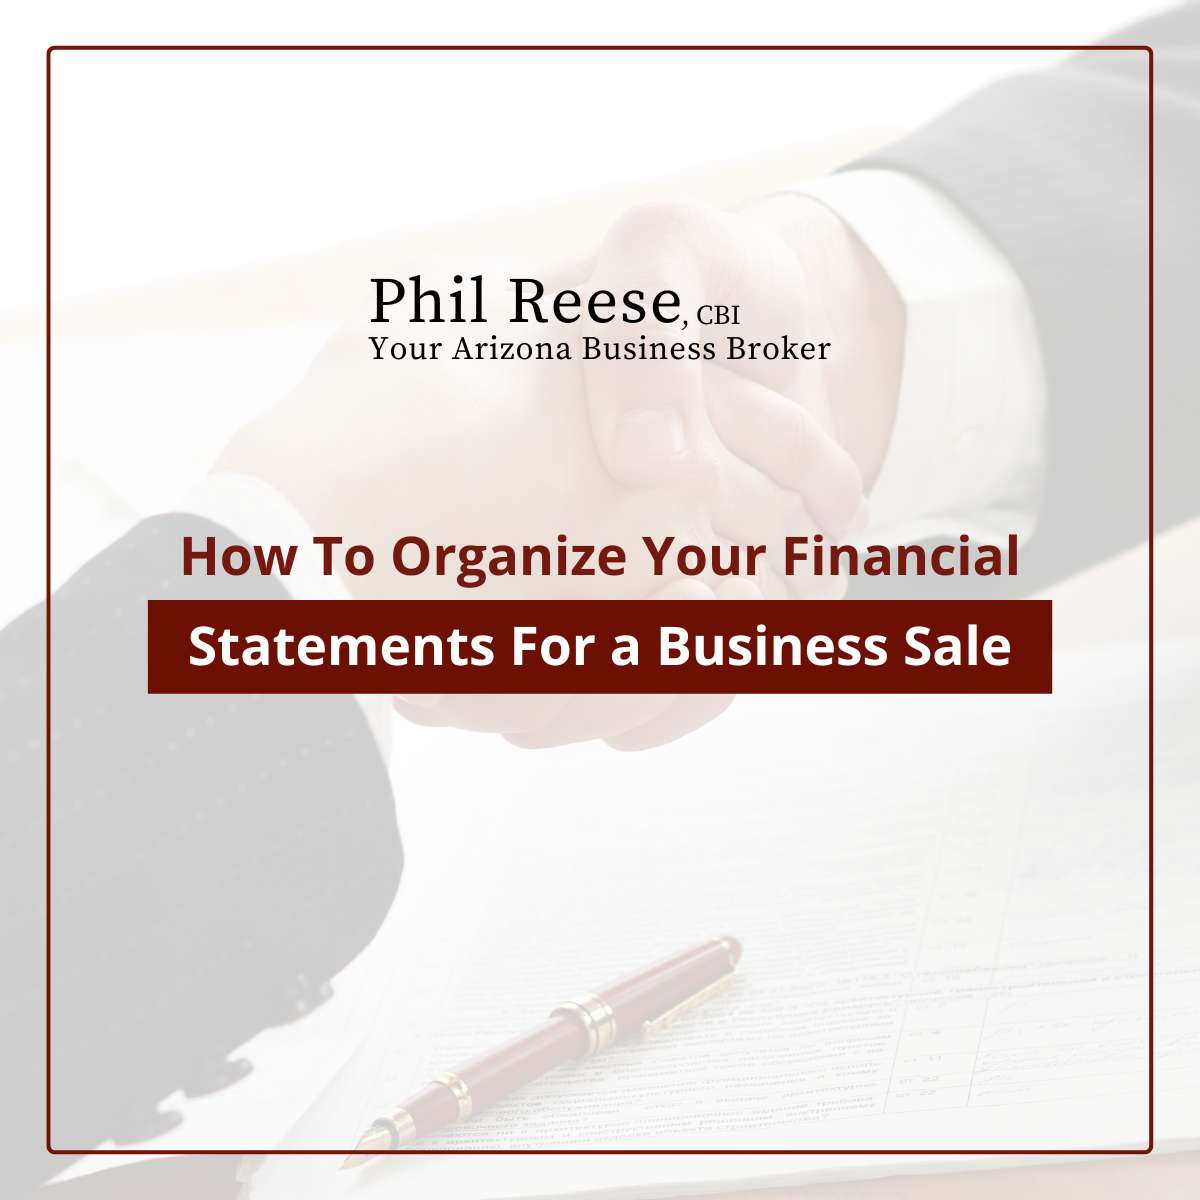 How To Organize Your Financial Statements For A Business Sale